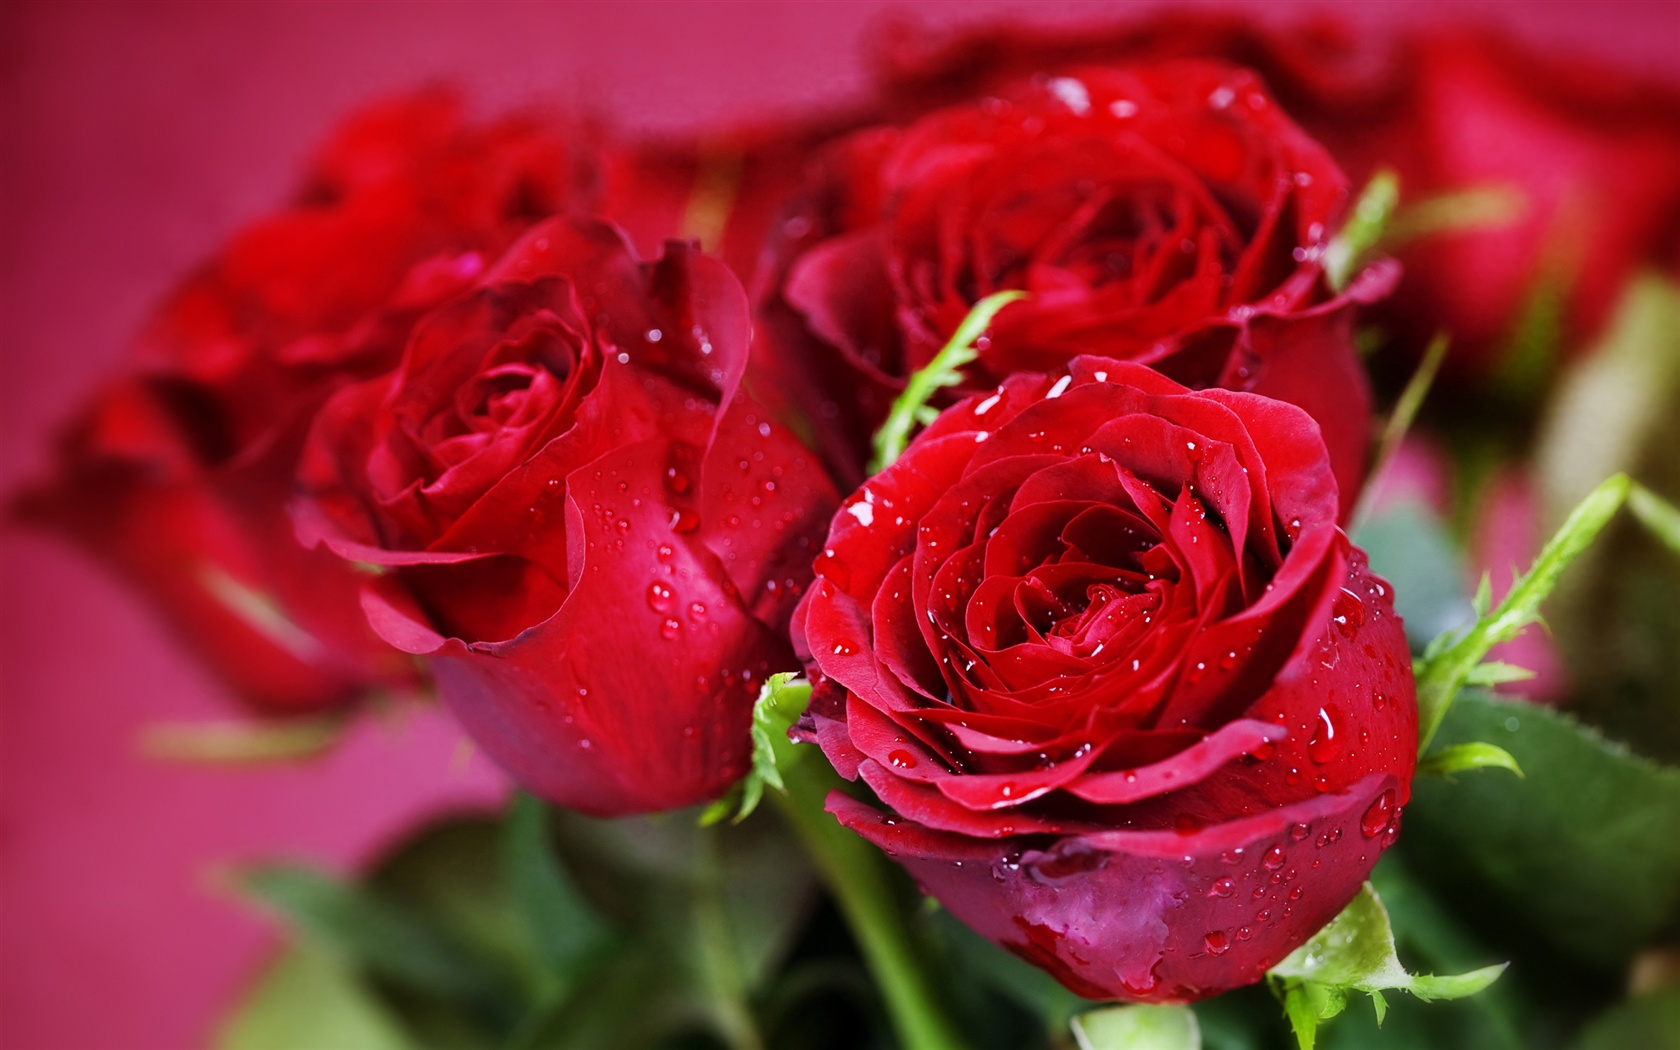 Water droplets flowers red roses close up Wallpaper 1680x1050